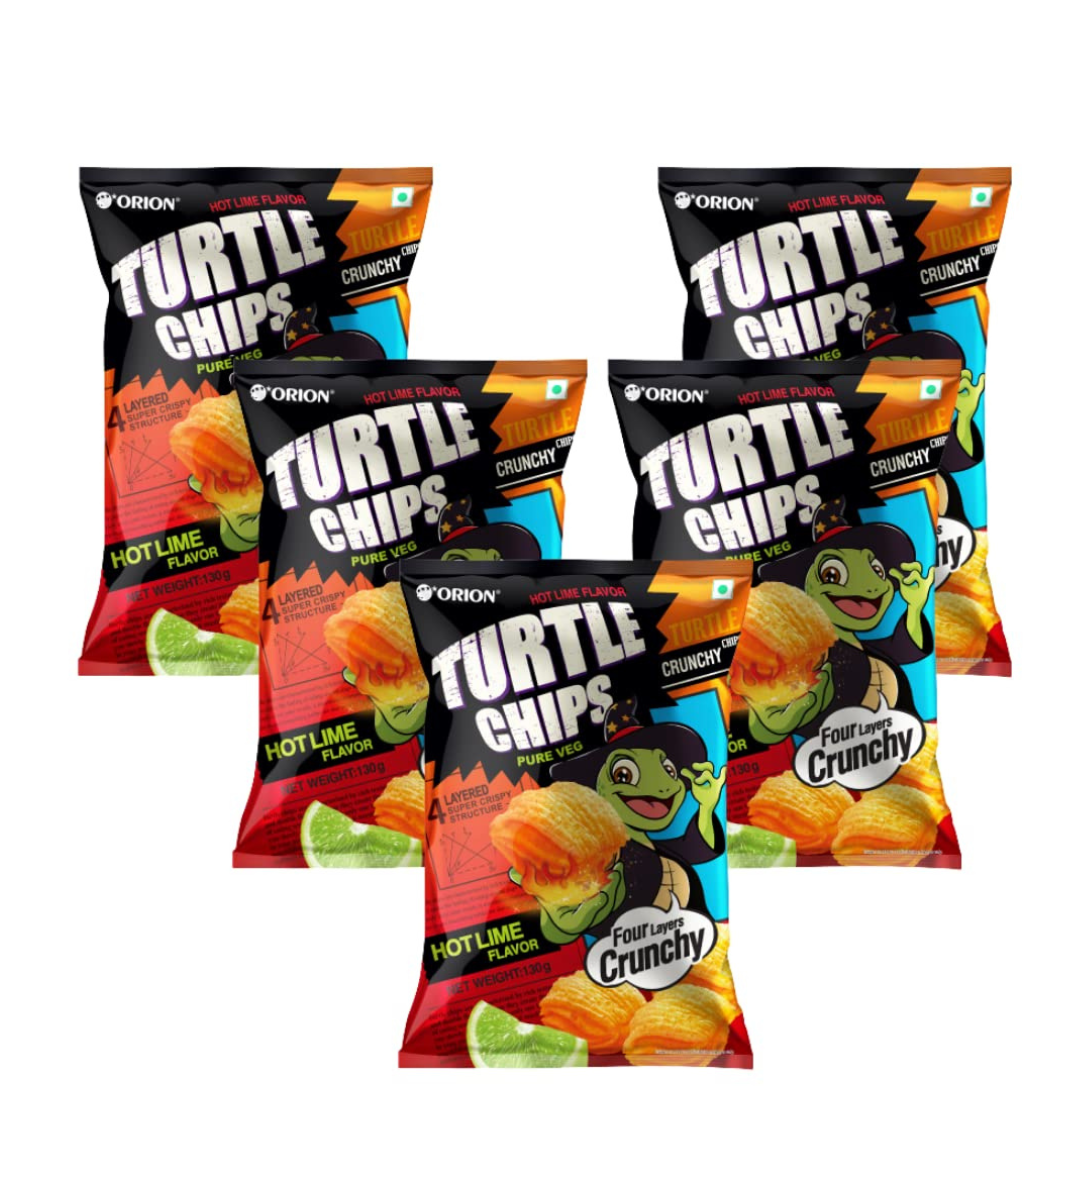 Orion Turtle Chips Party snack - Hot Lime 130g (Pack of 5)| Sweet & Salty |Korean Snack| 100% veg| corn chips